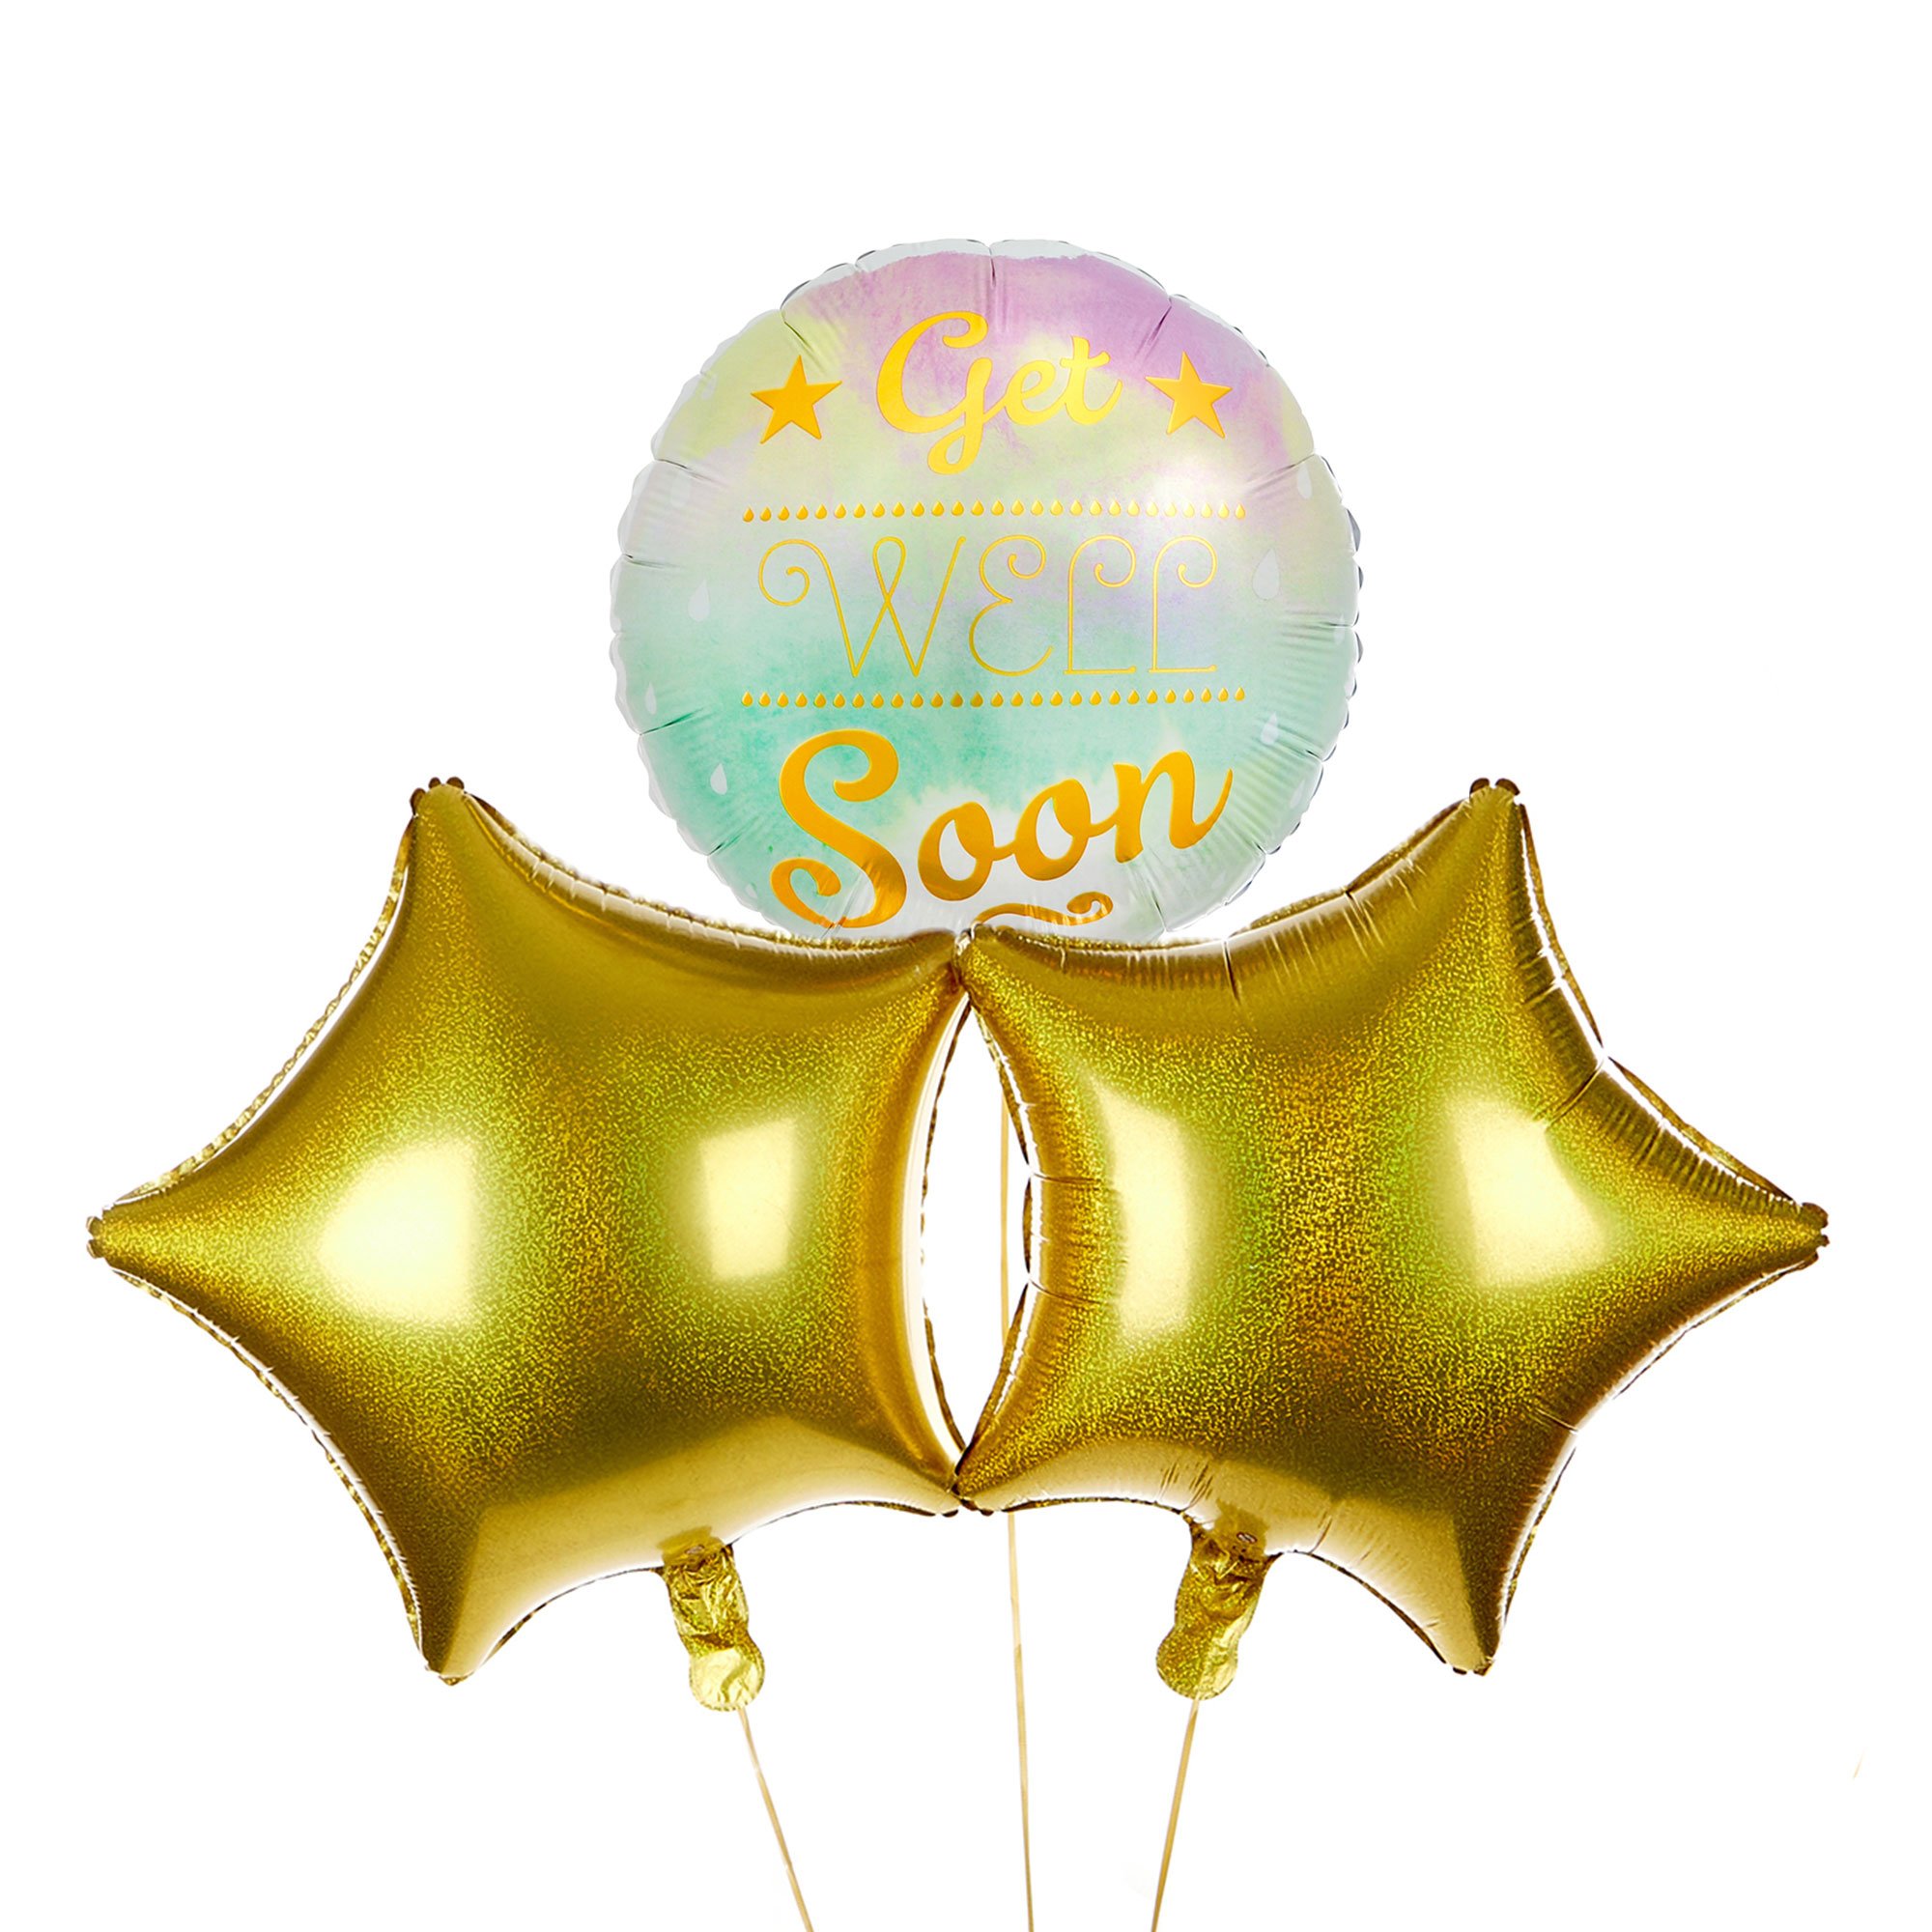 Watercolour Get Well Soon Balloon Bouquet - DELIVERED INFLATED!